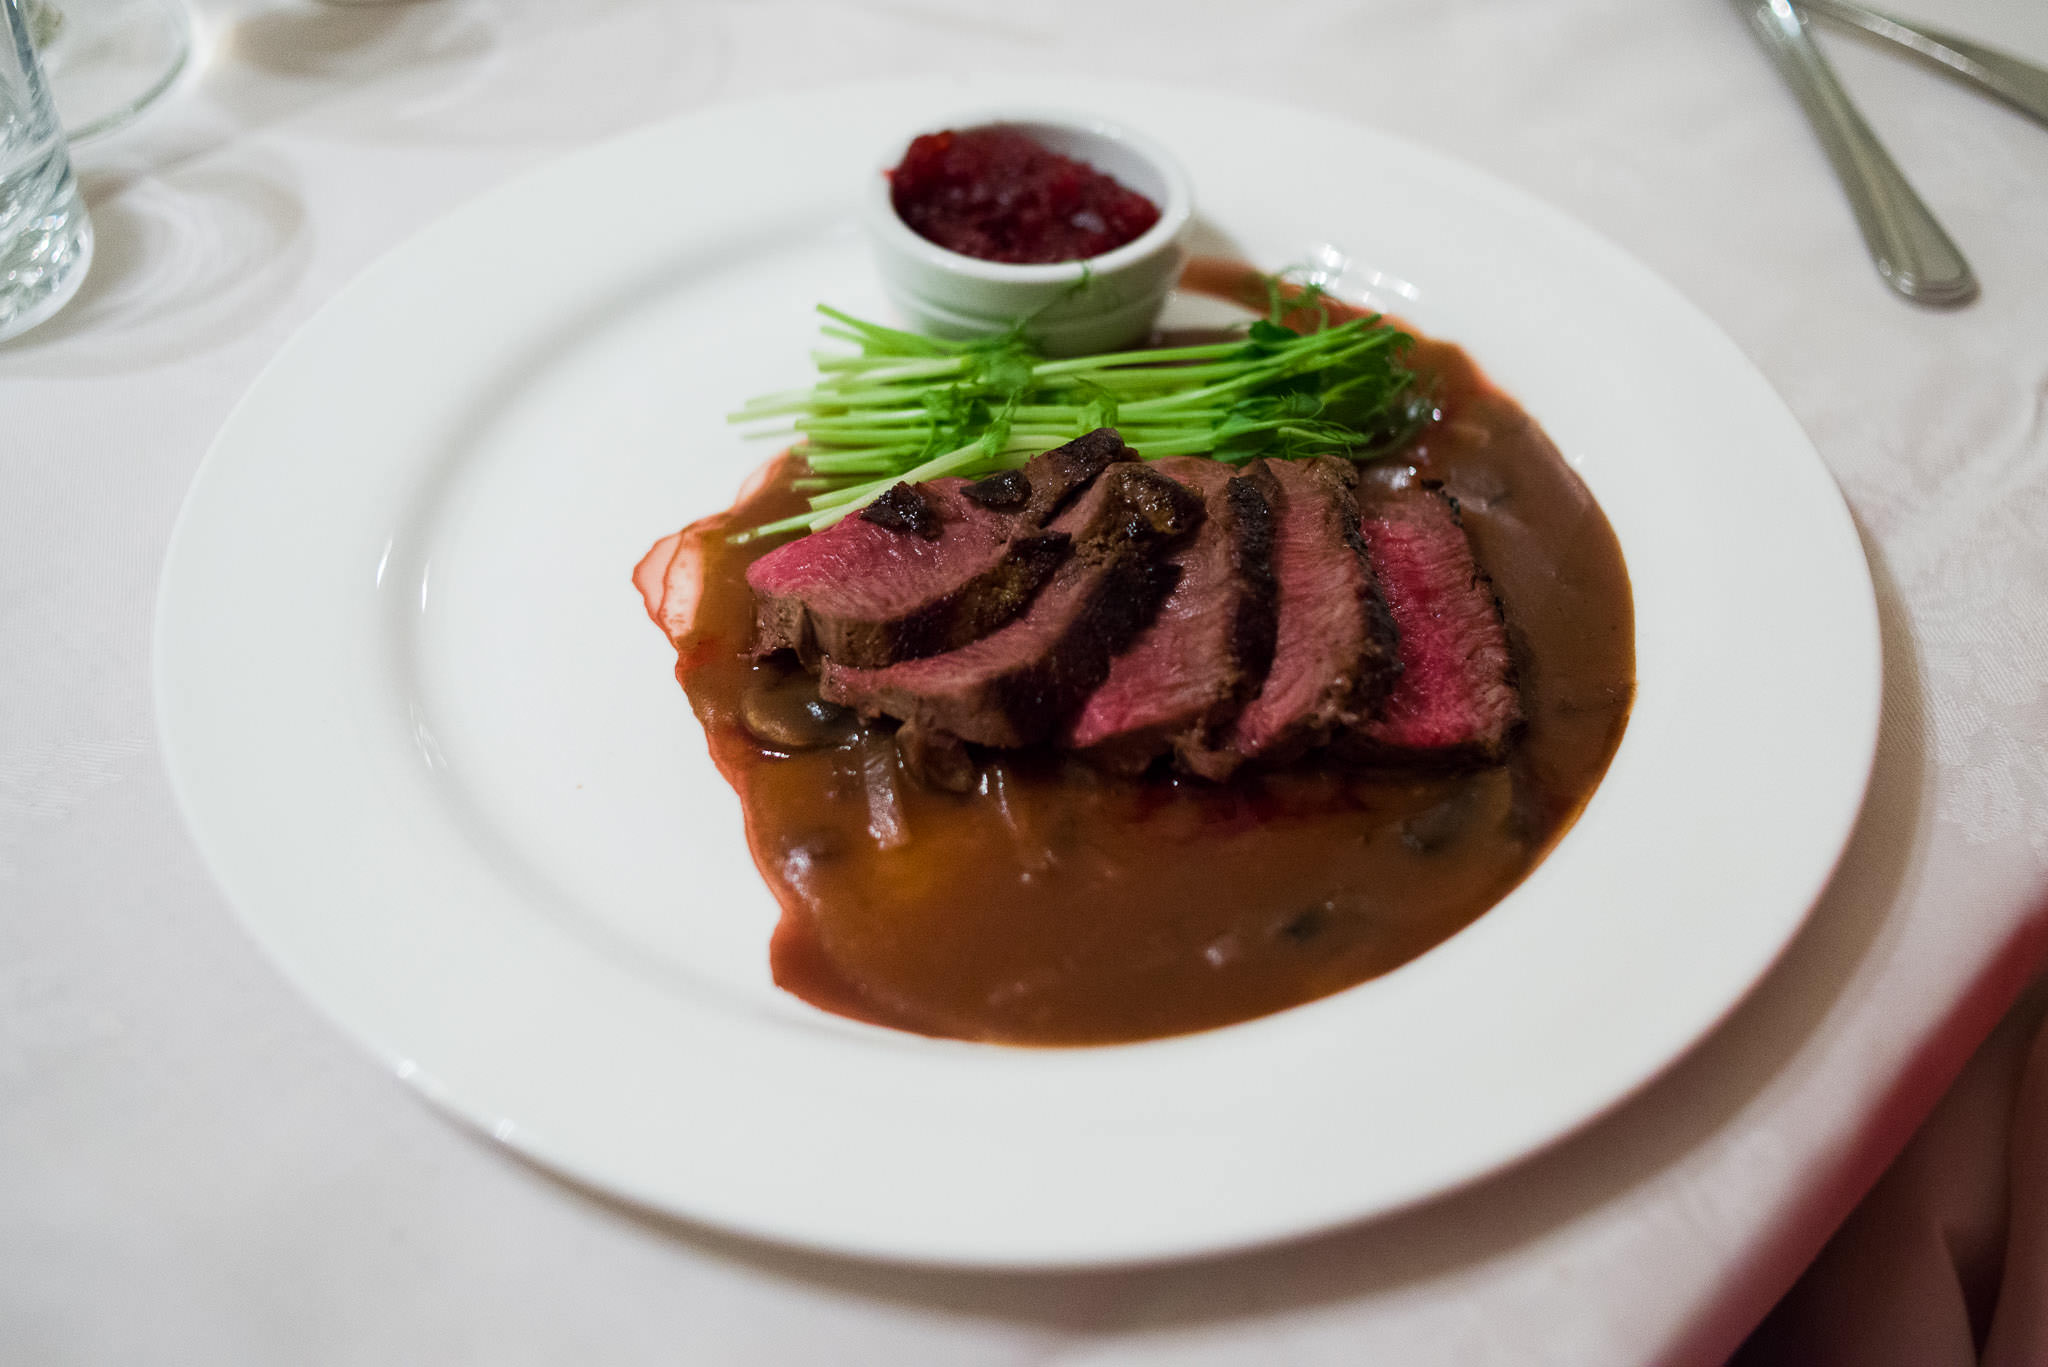 Grilled venison sirloin served on mushroom sauce with cranberry sauce on the side, Conti's, Woodvale